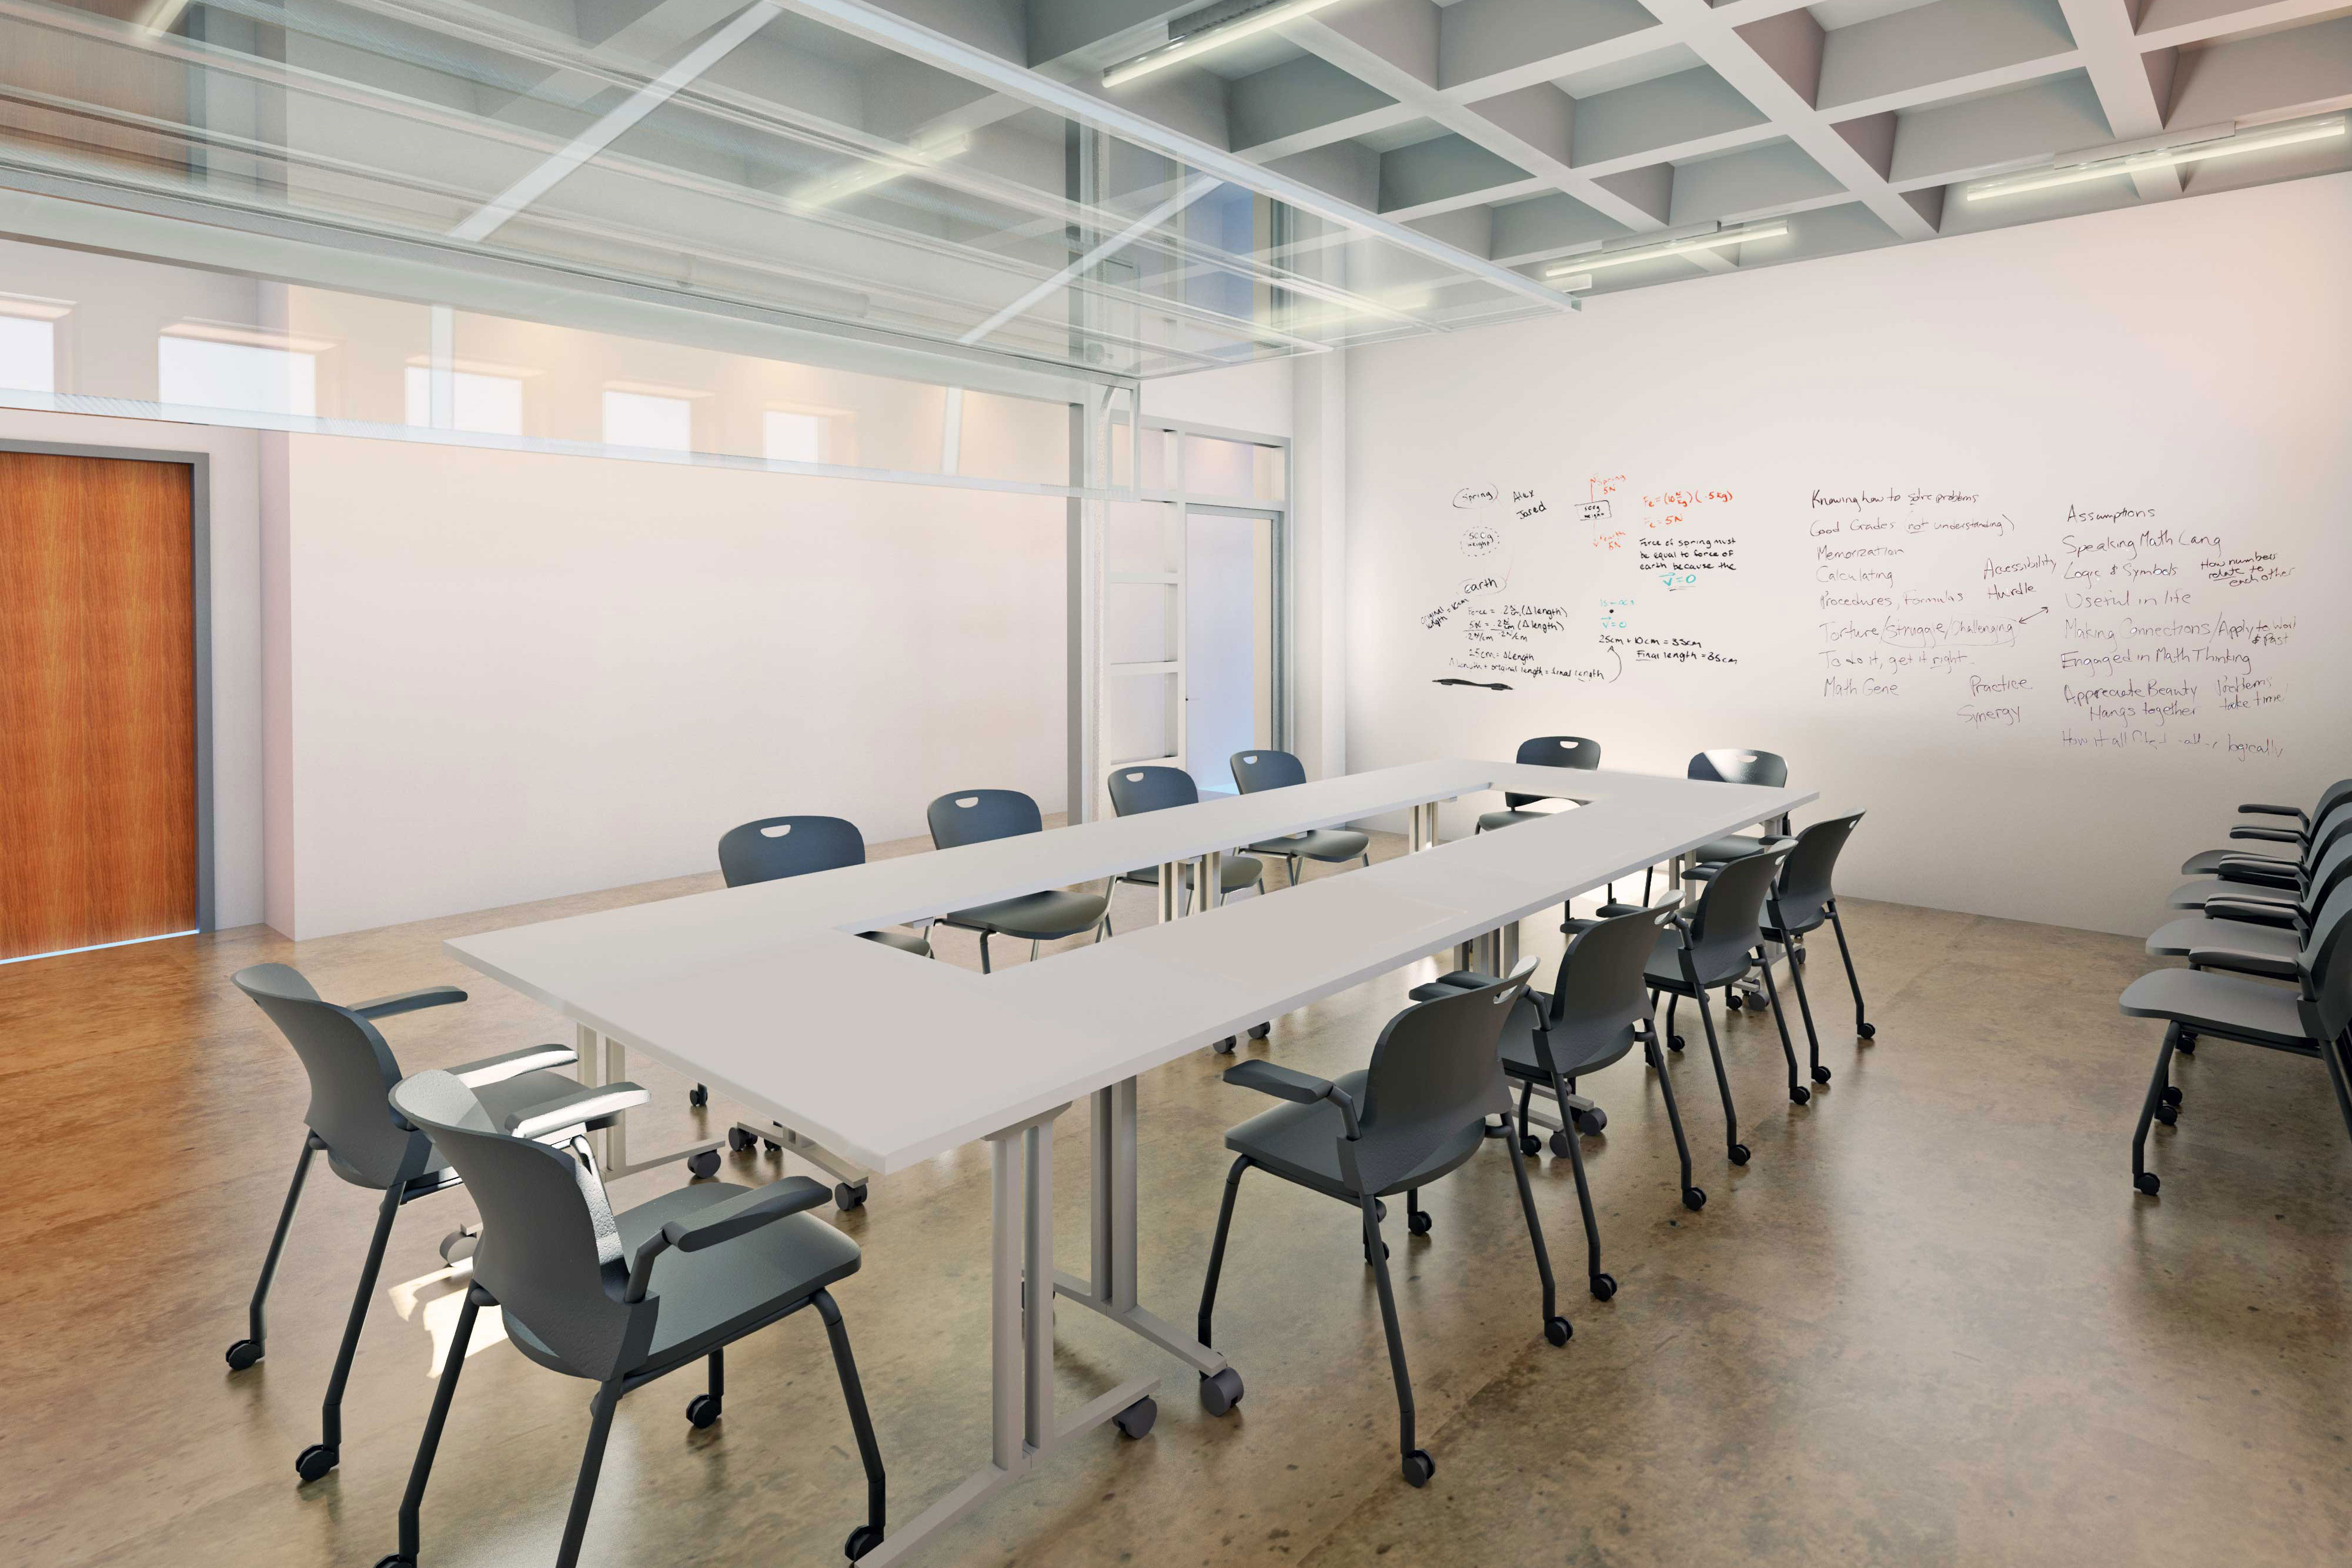 The advising center will include several large meeting rooms available to host advising workshops and other events. (Photo credit: Eric Masters, architectural designer, Nalls Architecture) 